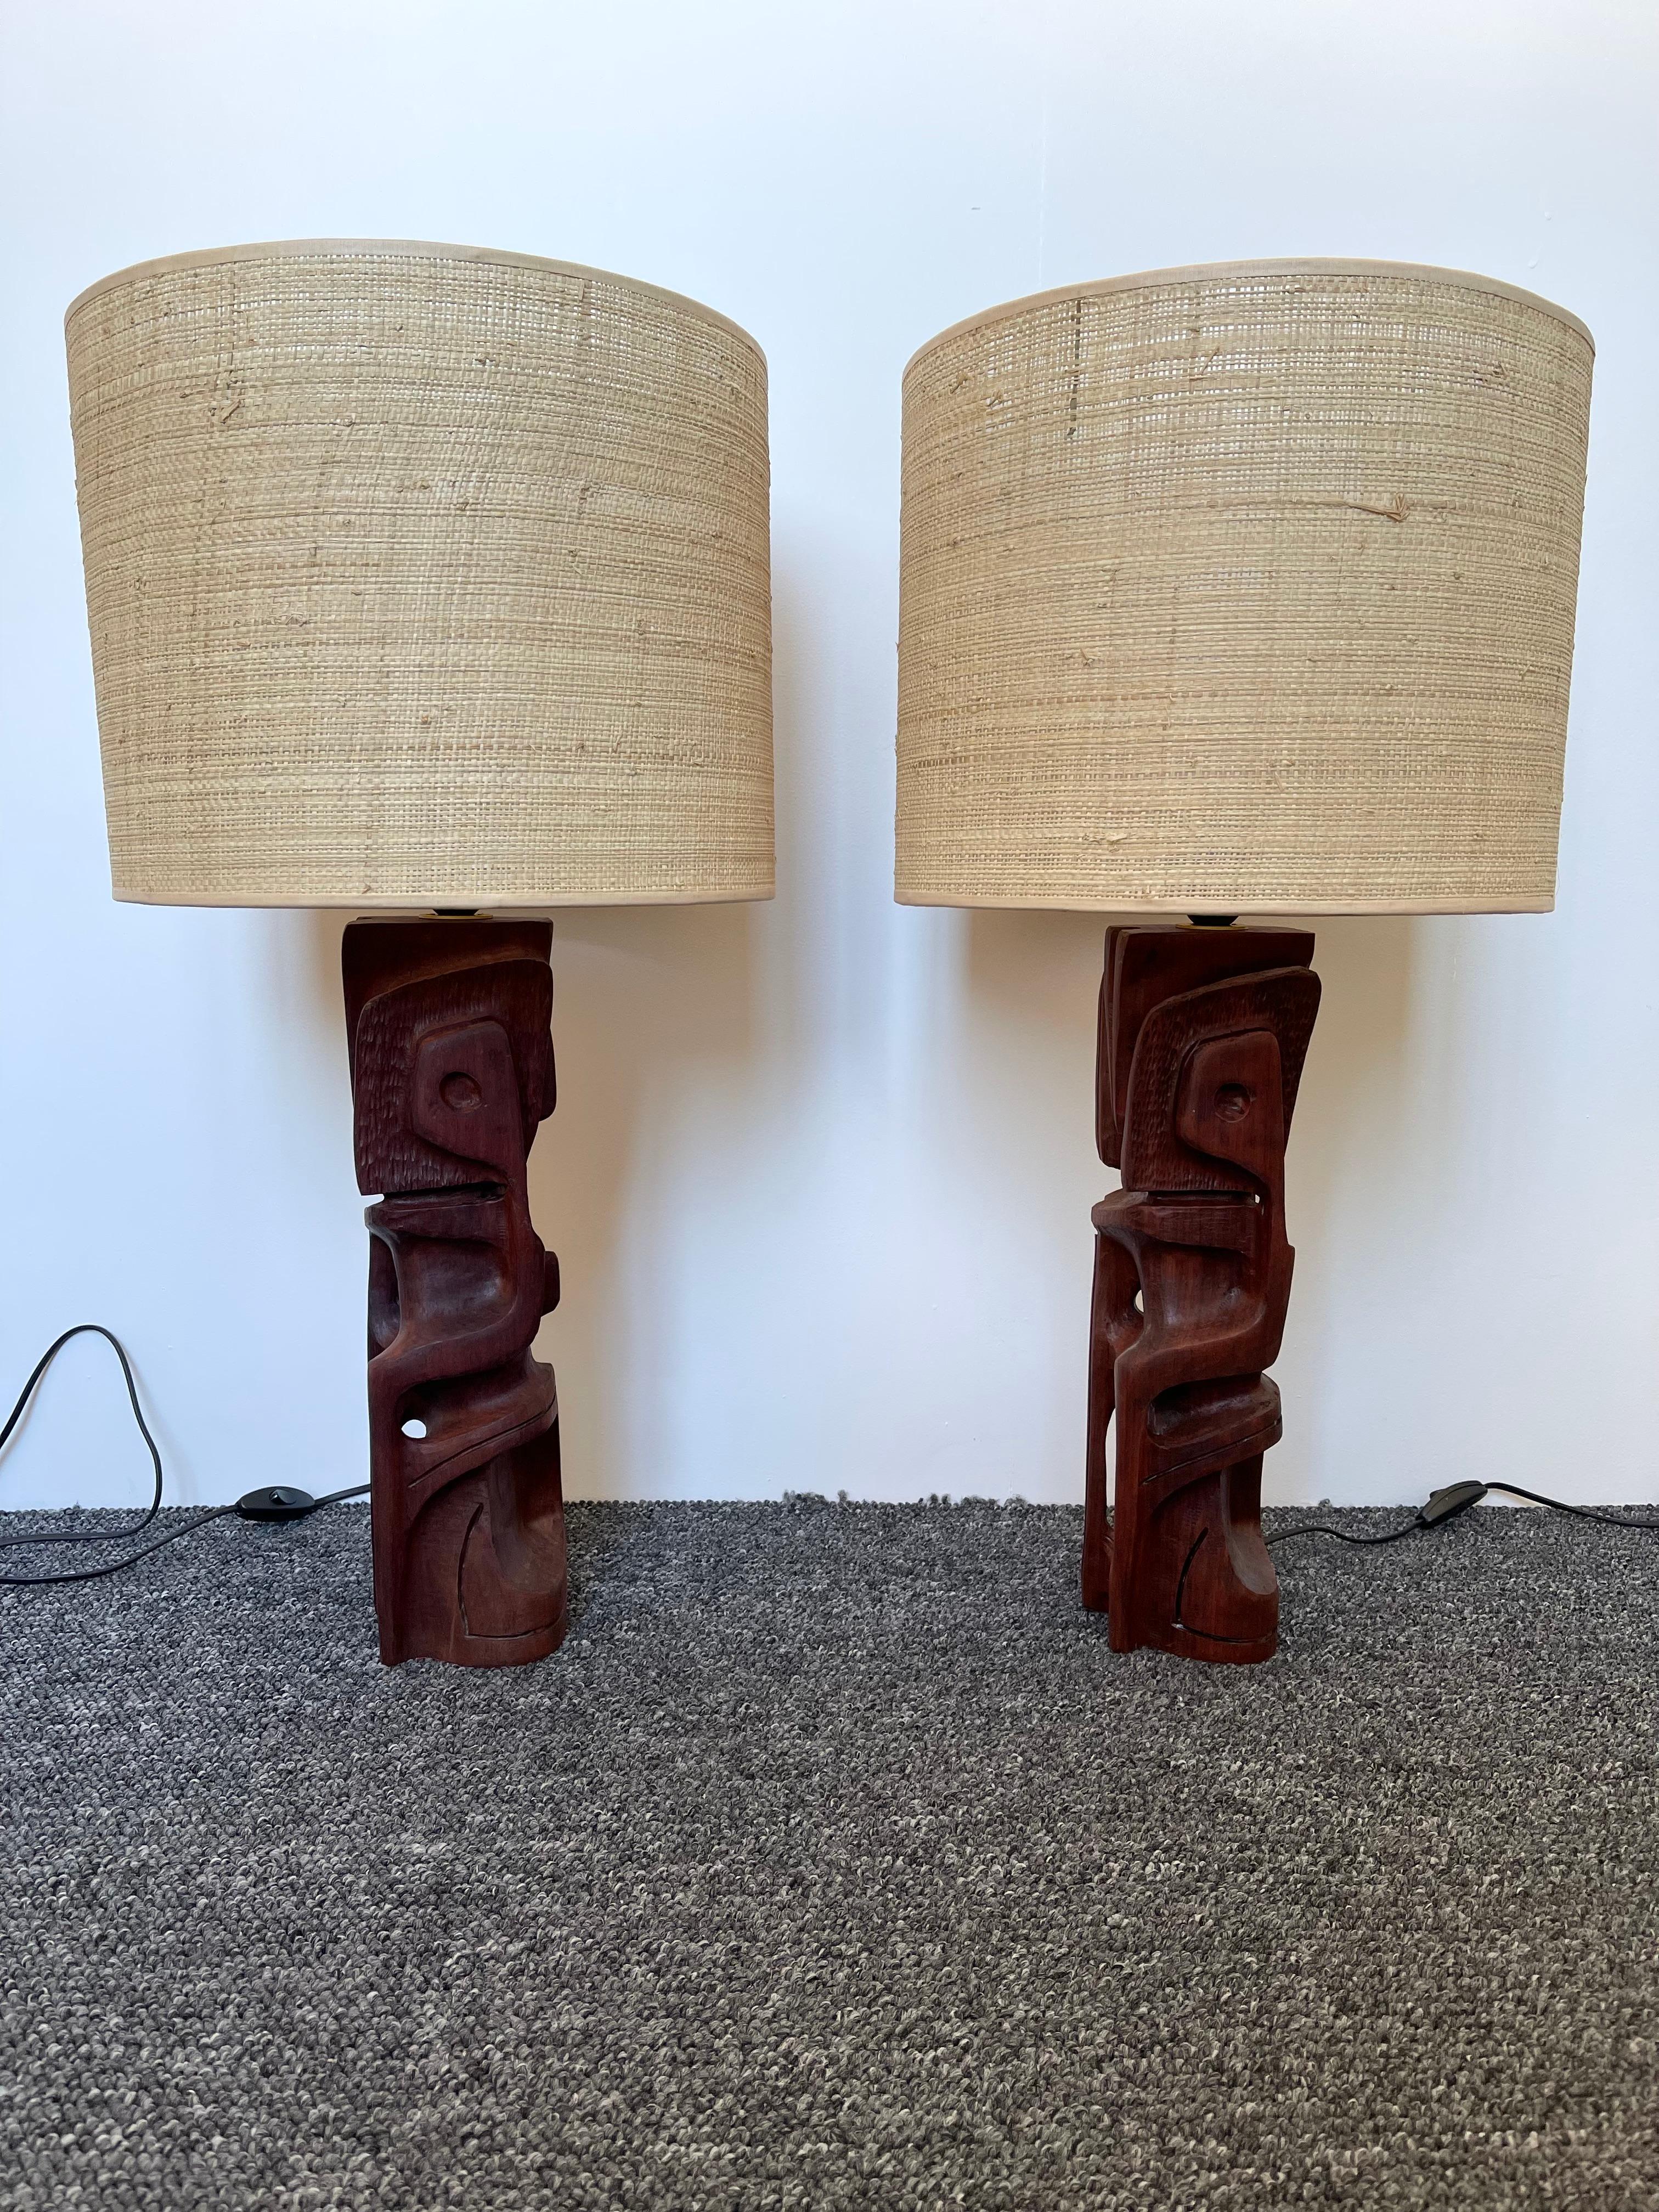 Wicker Pair of Wood Sculpture Lamps by Gianni Pinna. Italy, 1970s For Sale